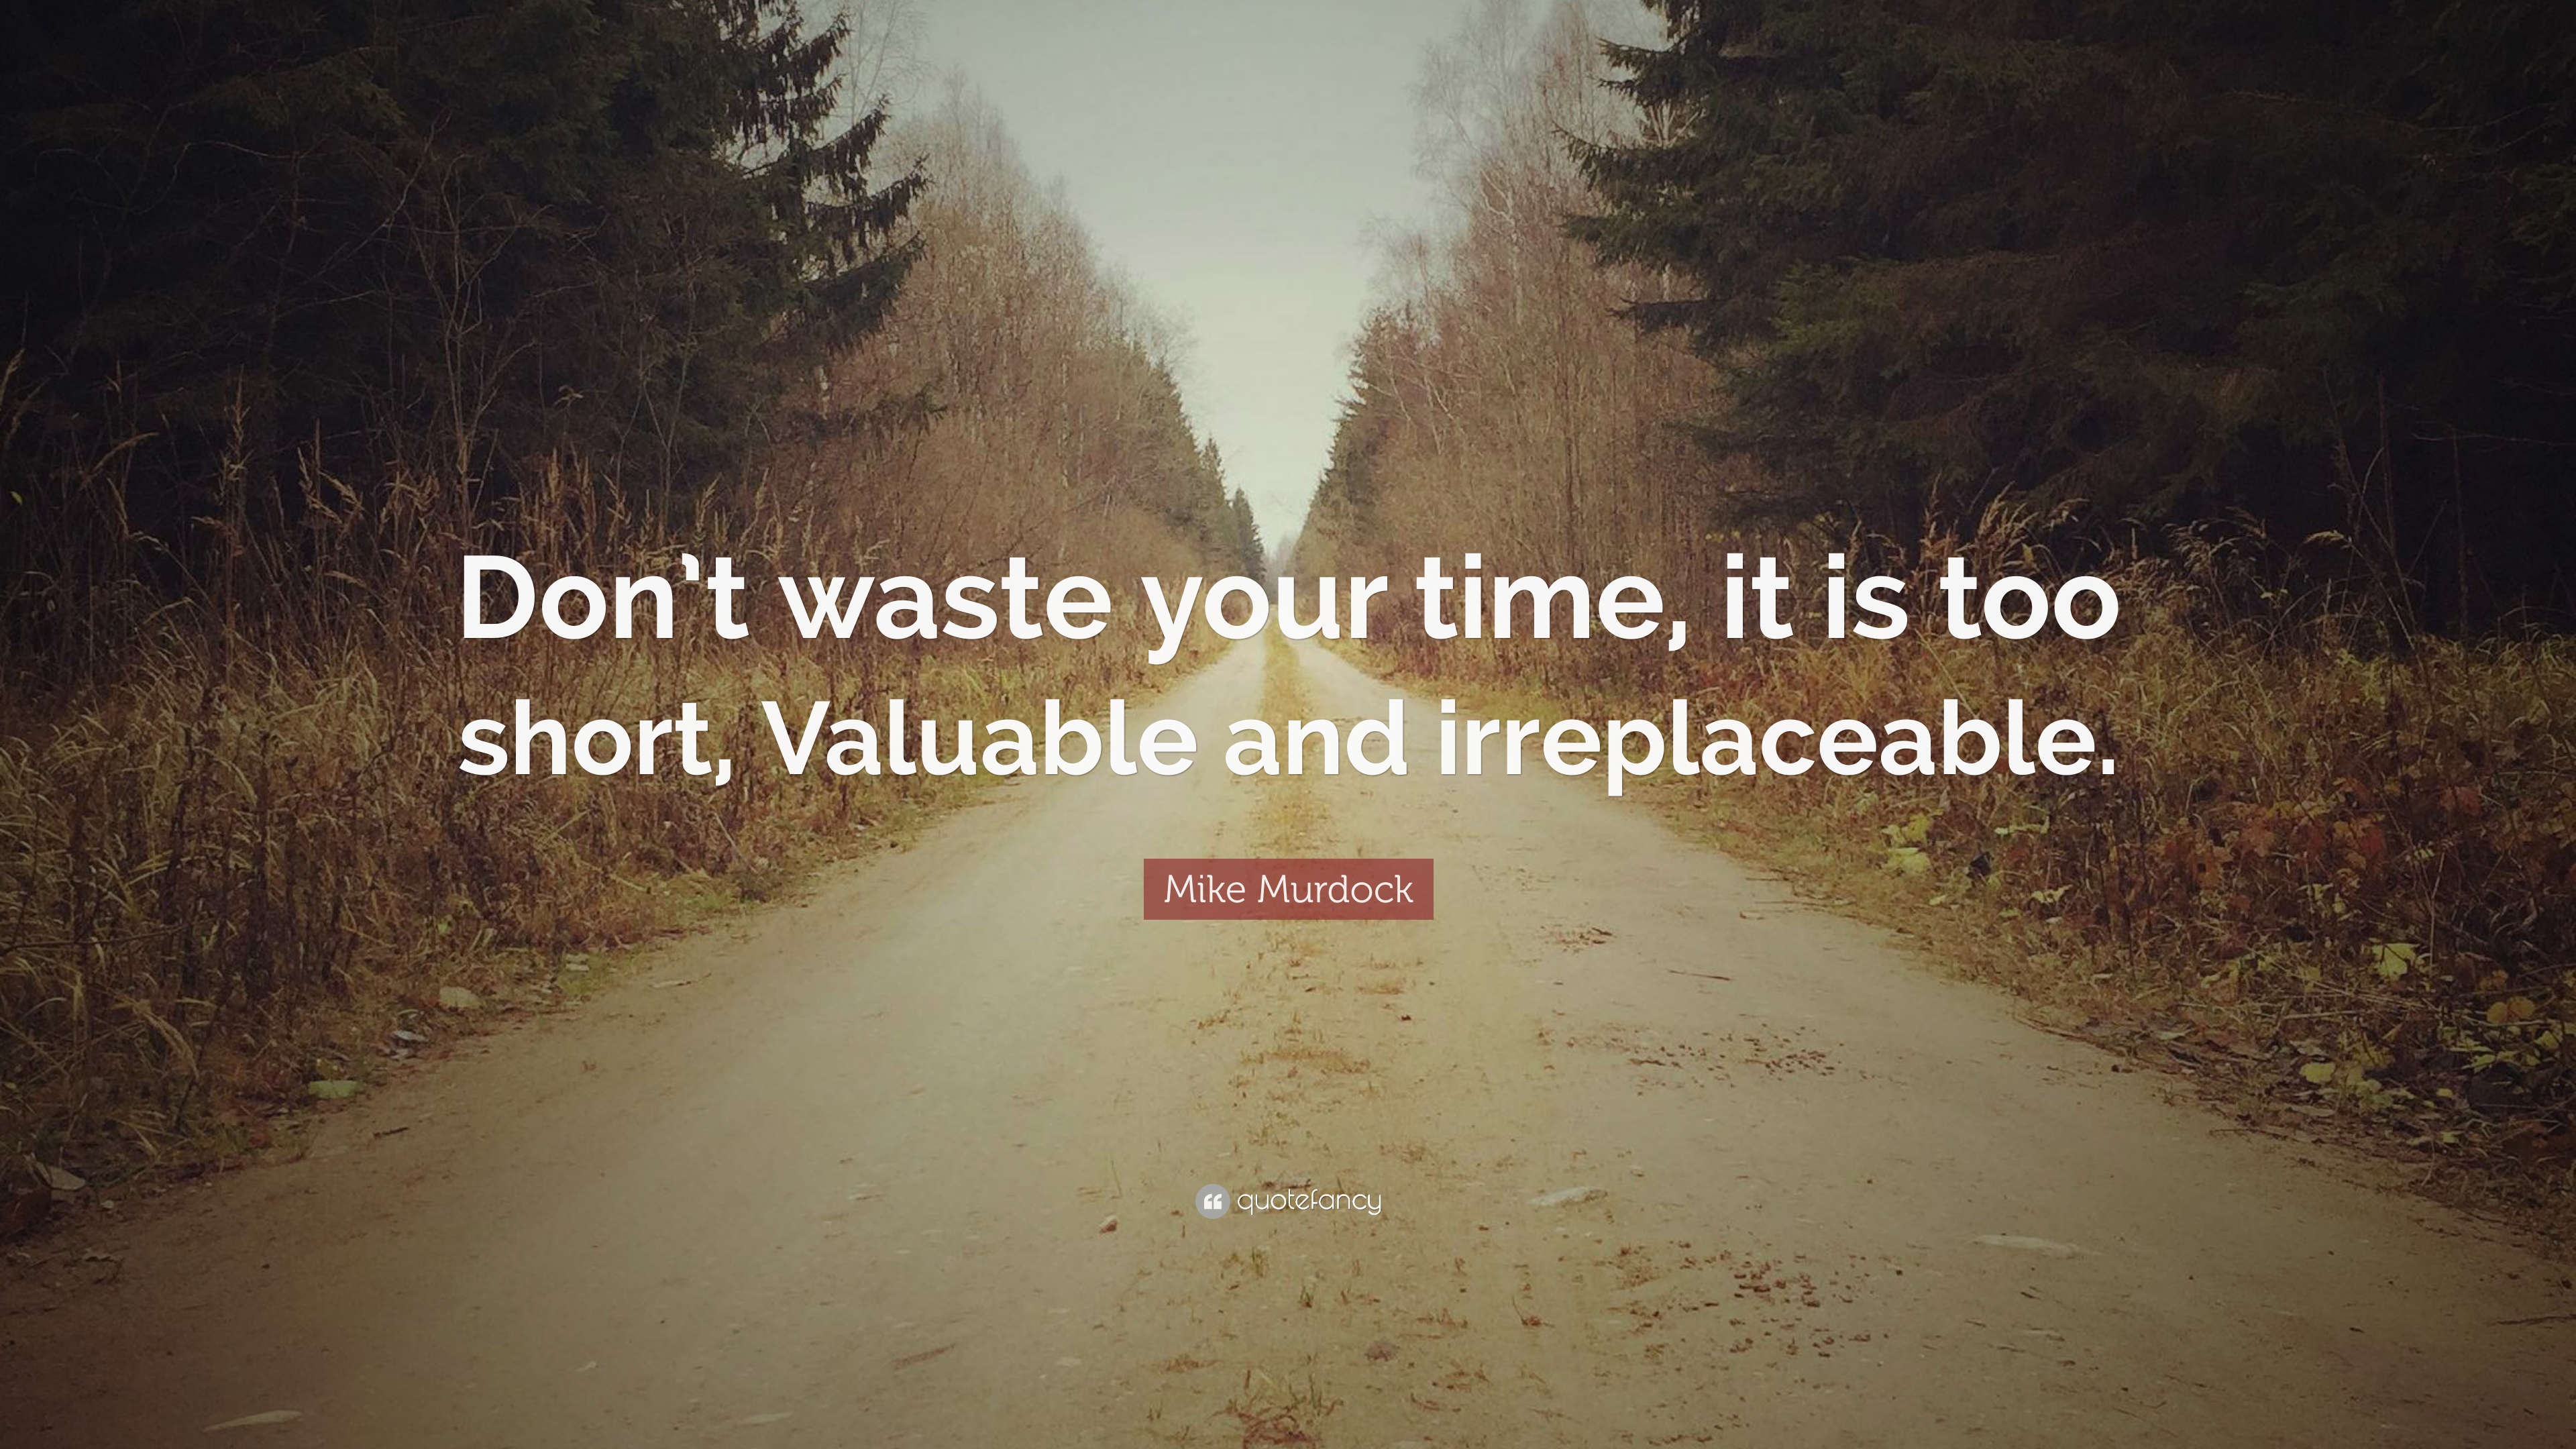 Mike Murdock Quote: “Don't waste your time, it is too short, Valuable and irreplaceable.”